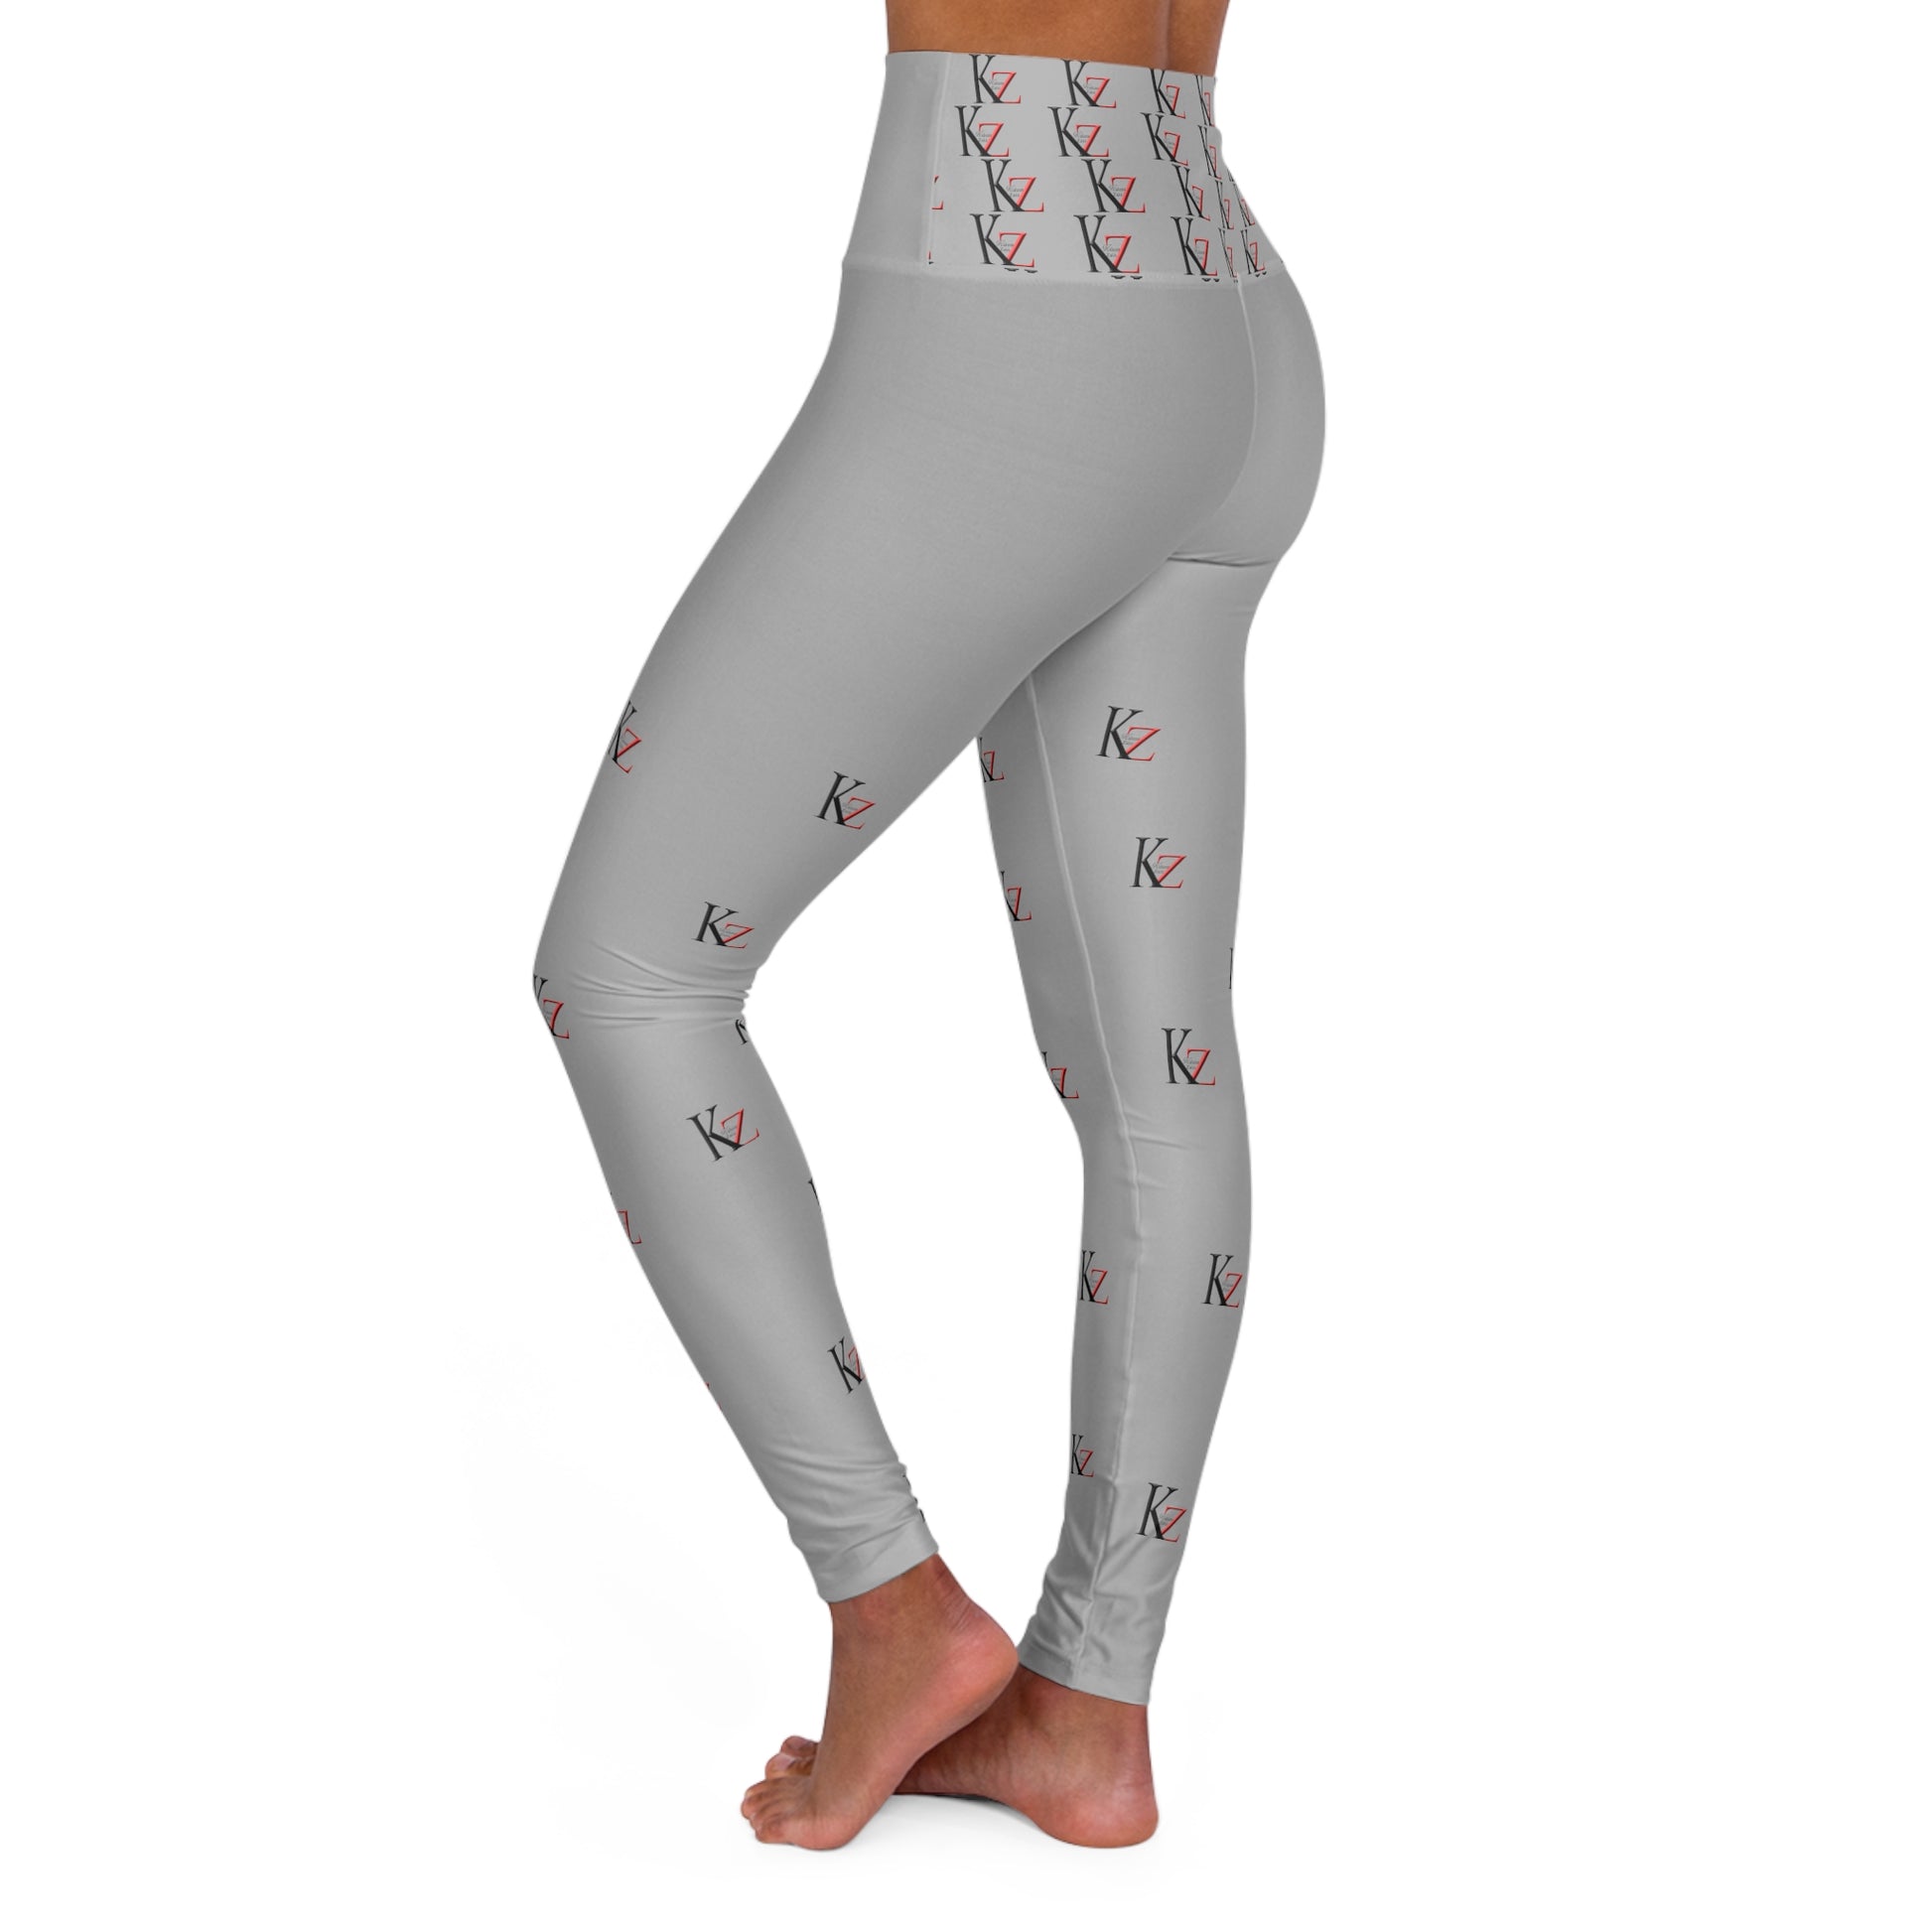 High Waisted  KZ monogram Leggings (Light Gray)) For an optimal fit, check out the KZ monogram Leggings. Crafted with stretchy fabric, these leggings feature a high-waisted and slim fit. Plus, the iconic Kalent Zaiz logo is featured around the waistband.